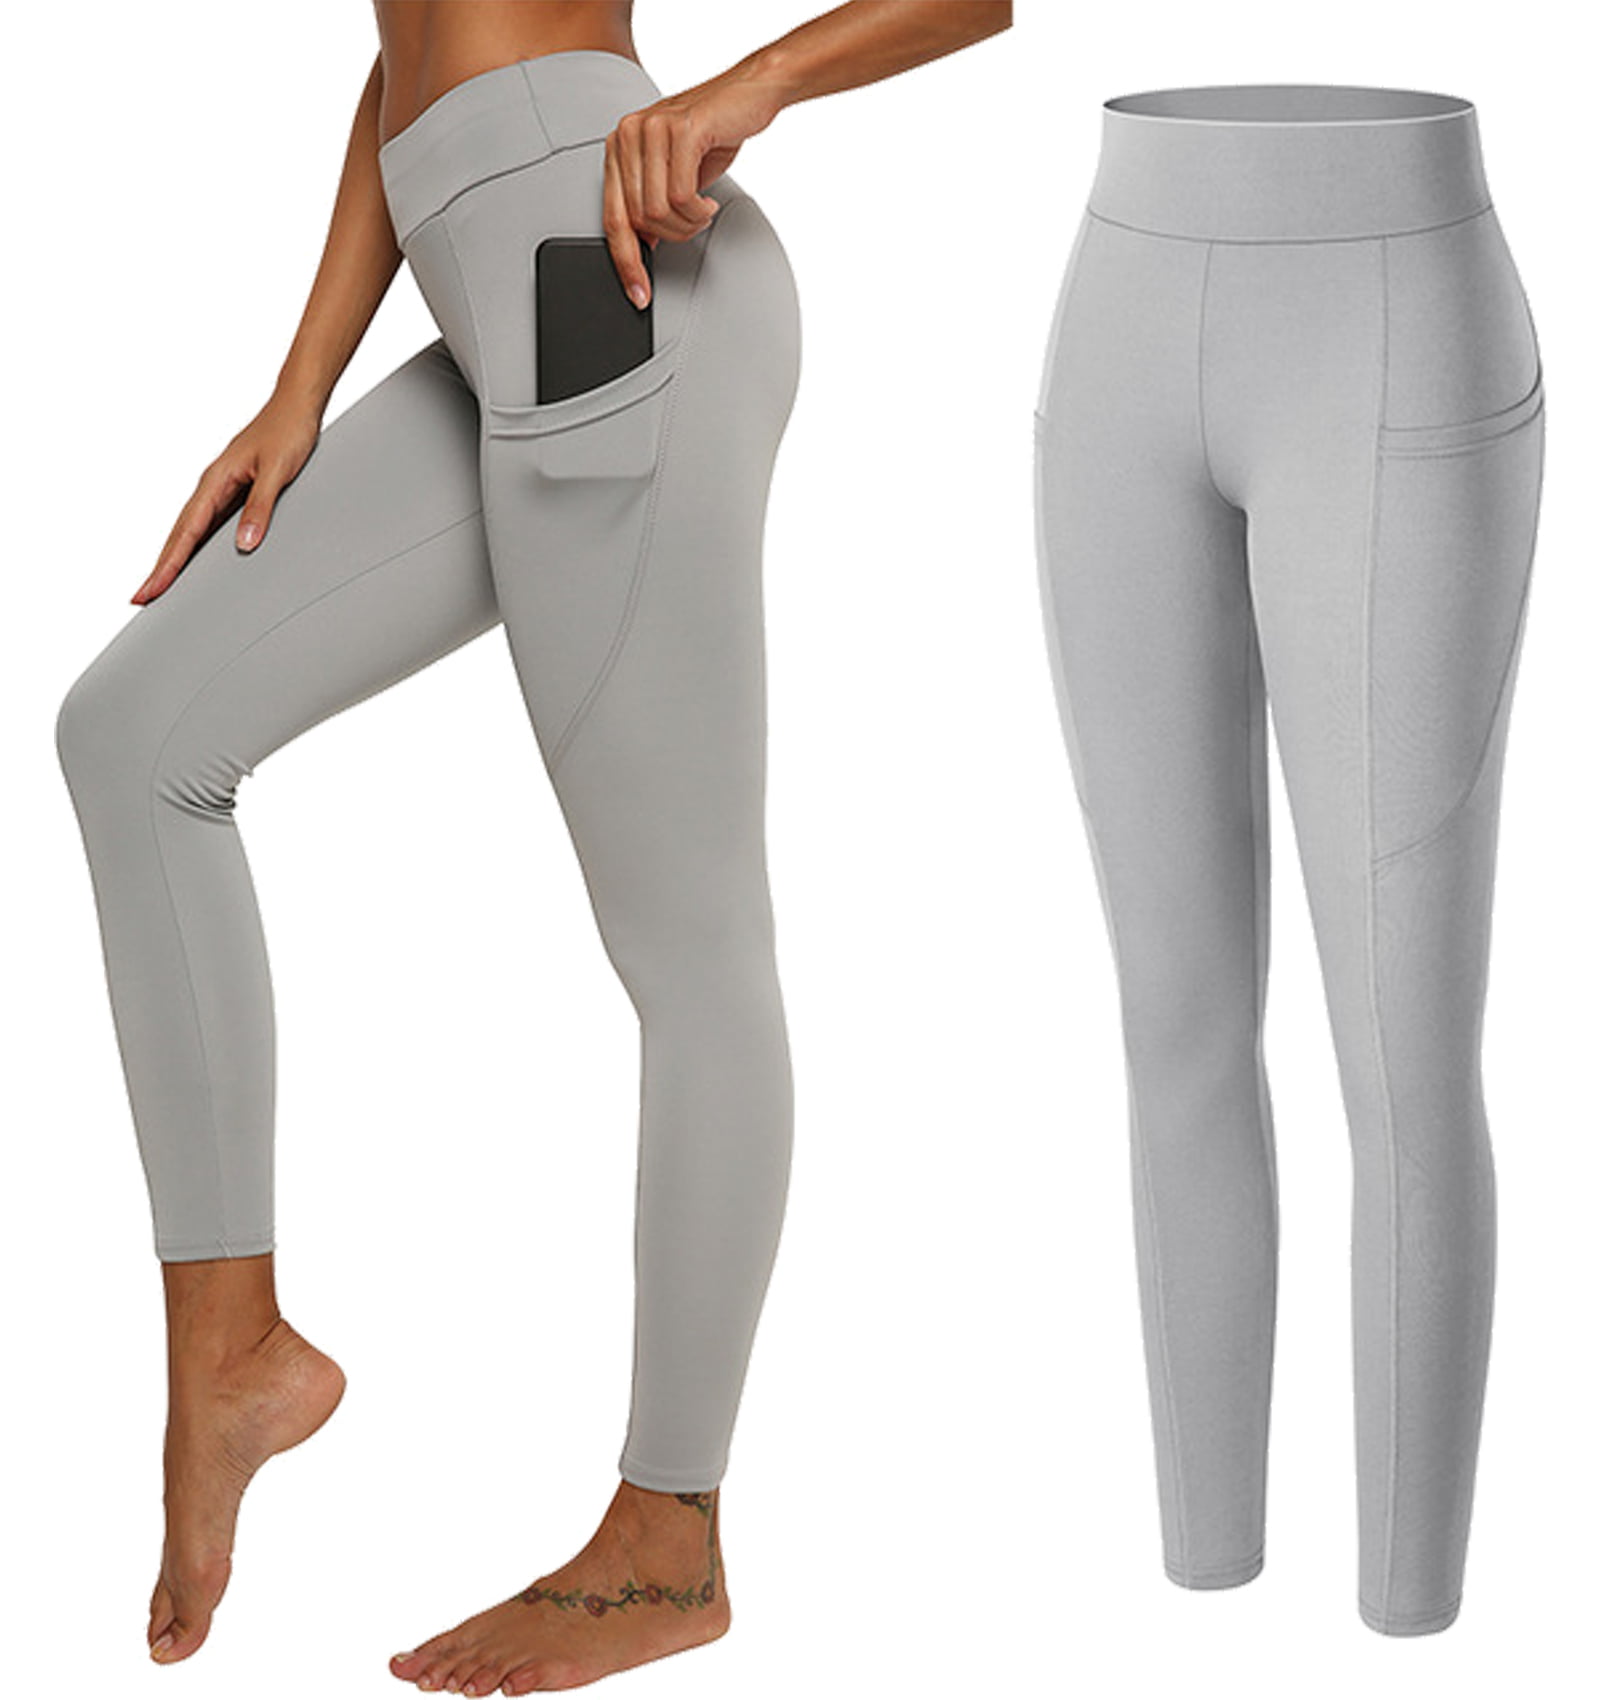 moisture wicking leggings with pockets